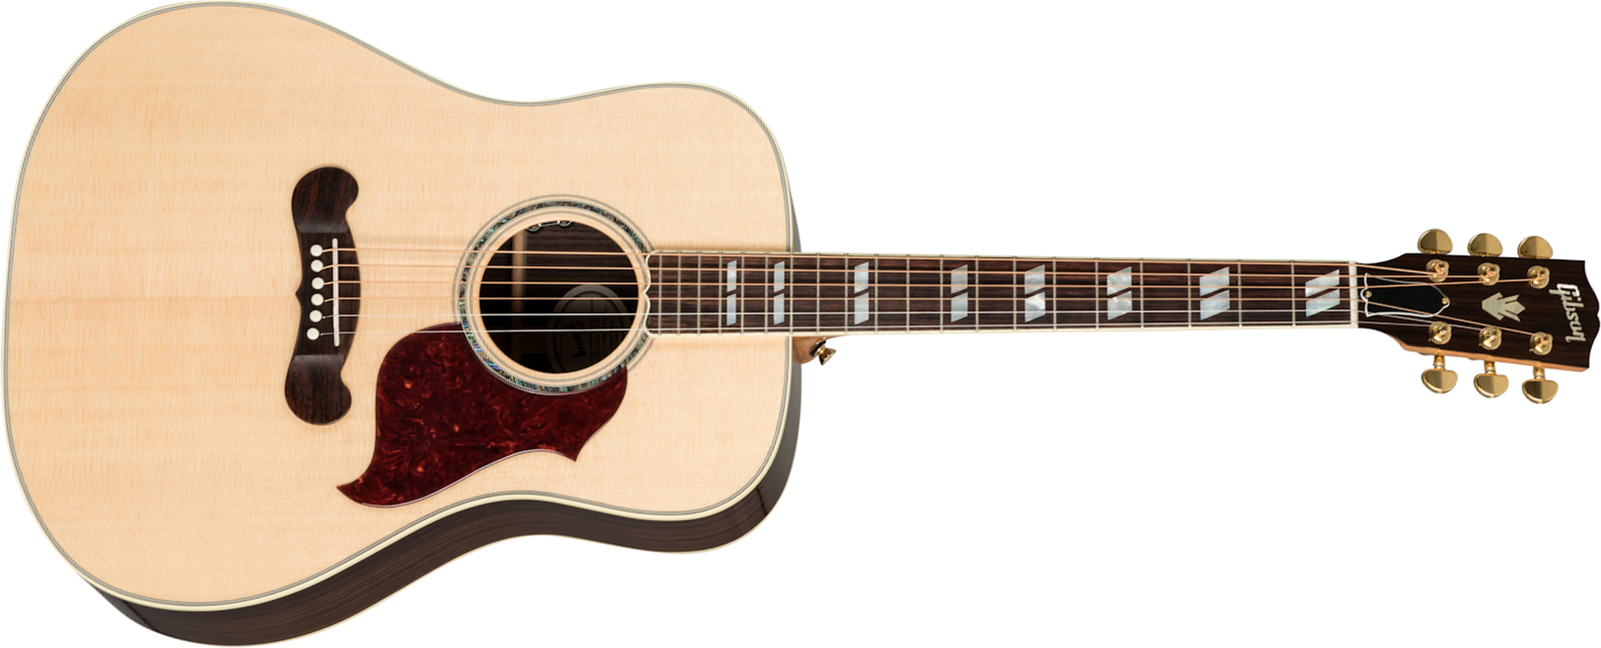 Gibson Songwriter Standard Rosewood 2019 Epicea Palissandre Rw - Antique Natural - Electro acoustic guitar - Main picture